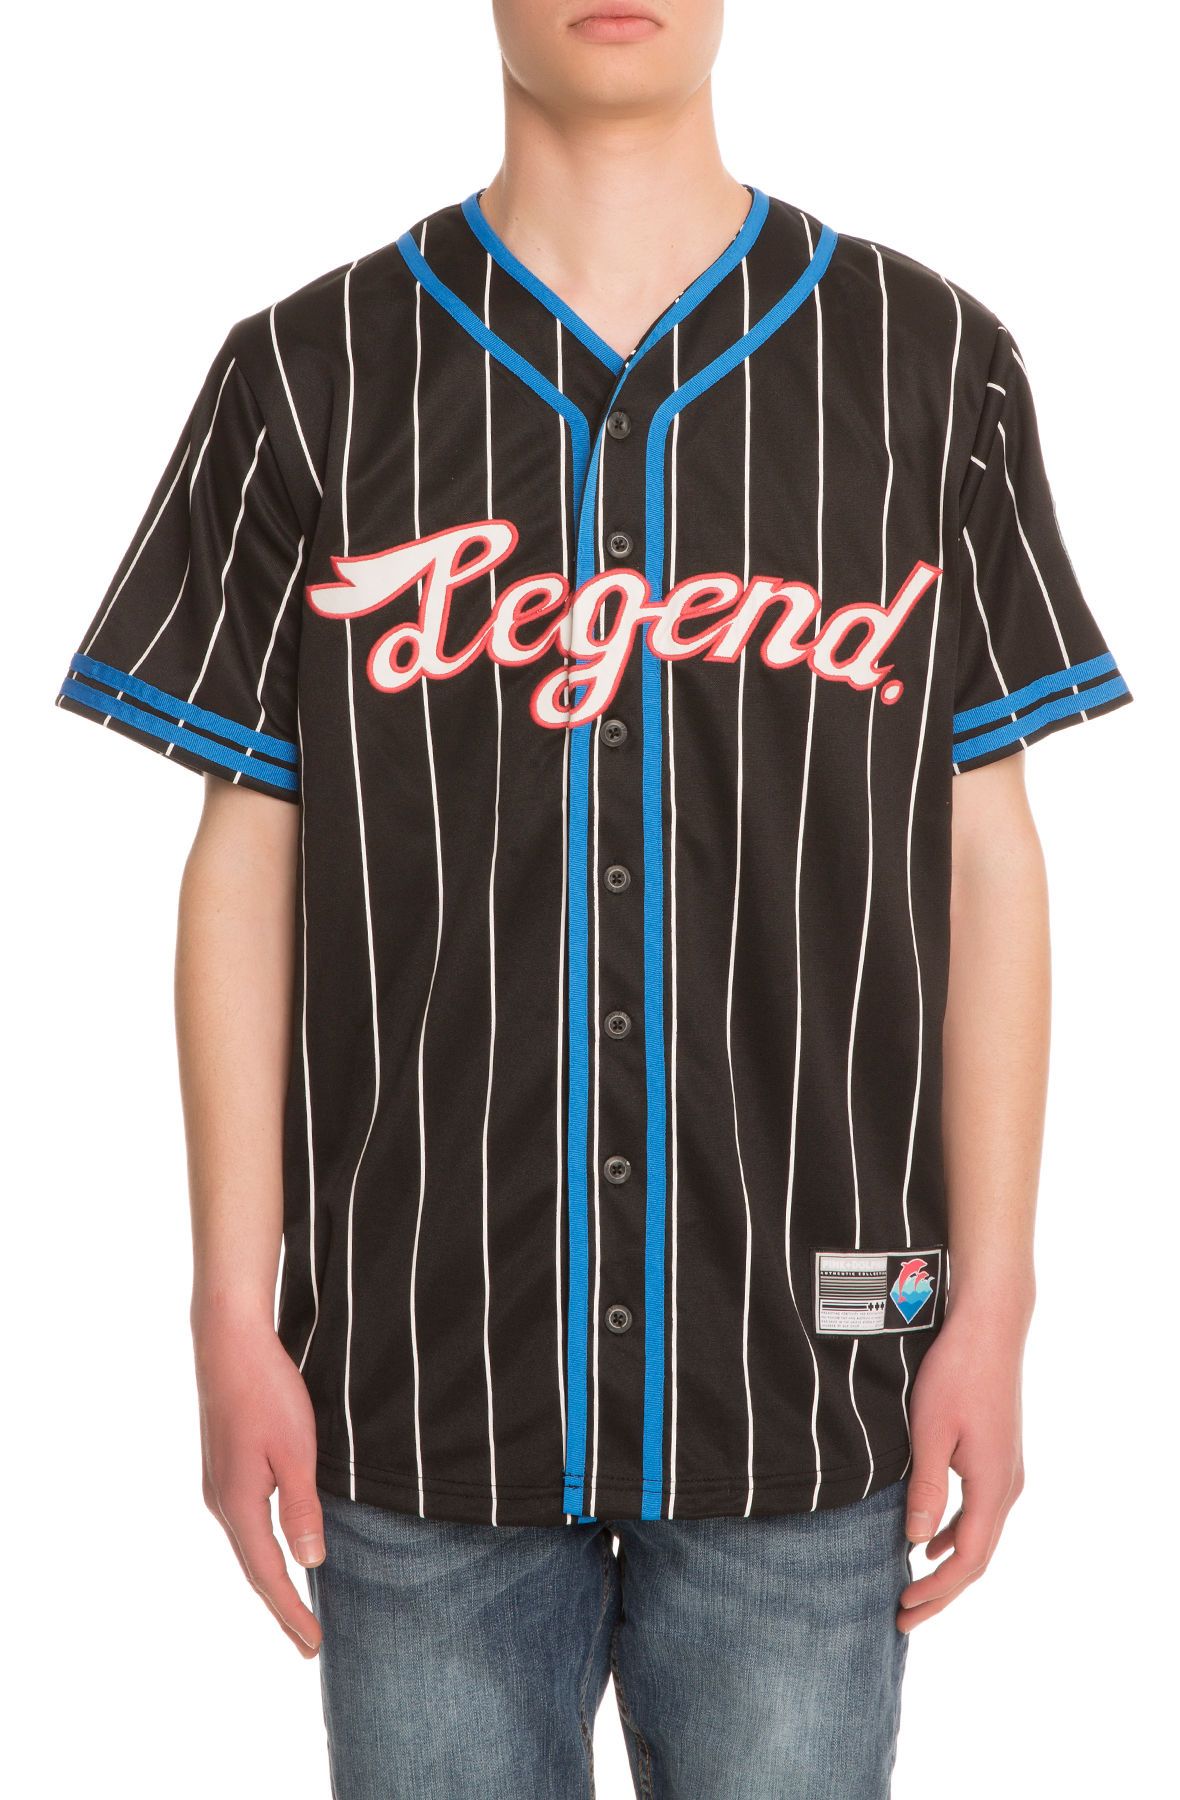 PINK DOLPHIN The Legend Baseball Jersey in PS11704LEYBL-BLK - Shiekh